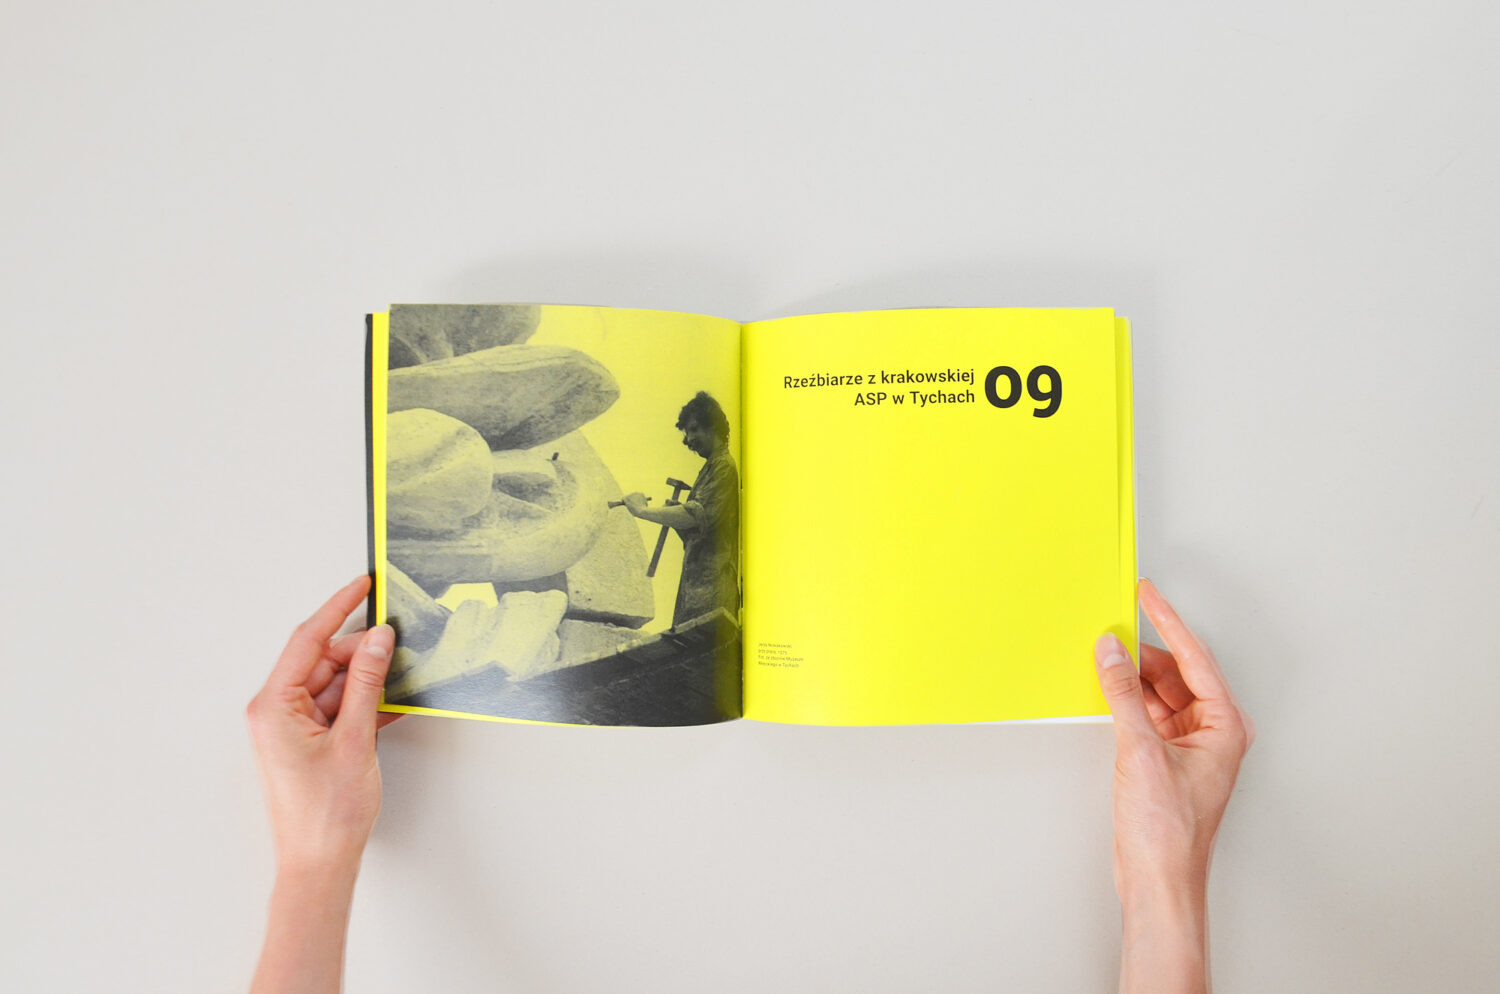 Publication design - contrast, typography, vivid colour. Tychy. Sztuka w przestrzeni miasta. I highlighted the sculptures by underlining their names and photos in yellow. 